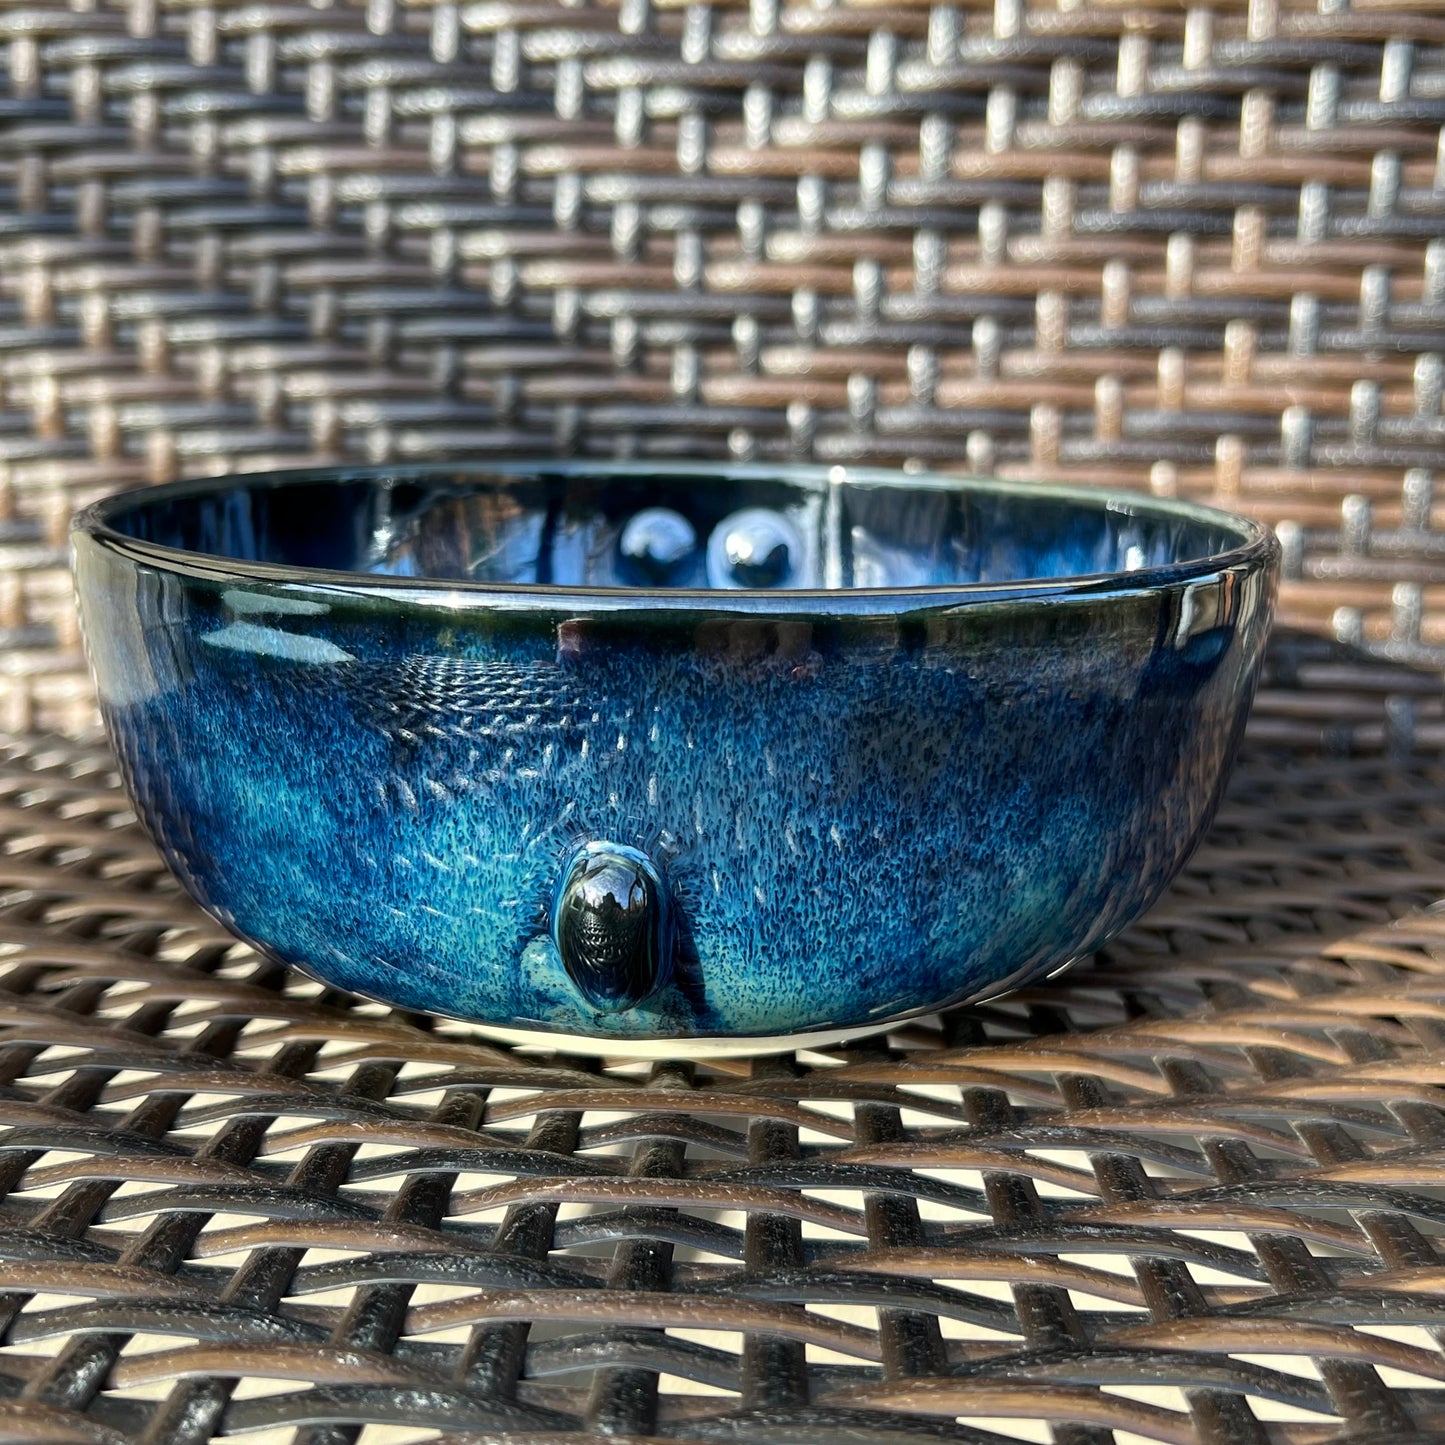 Rock Dogs Pet Serving Bowl - Starry Night